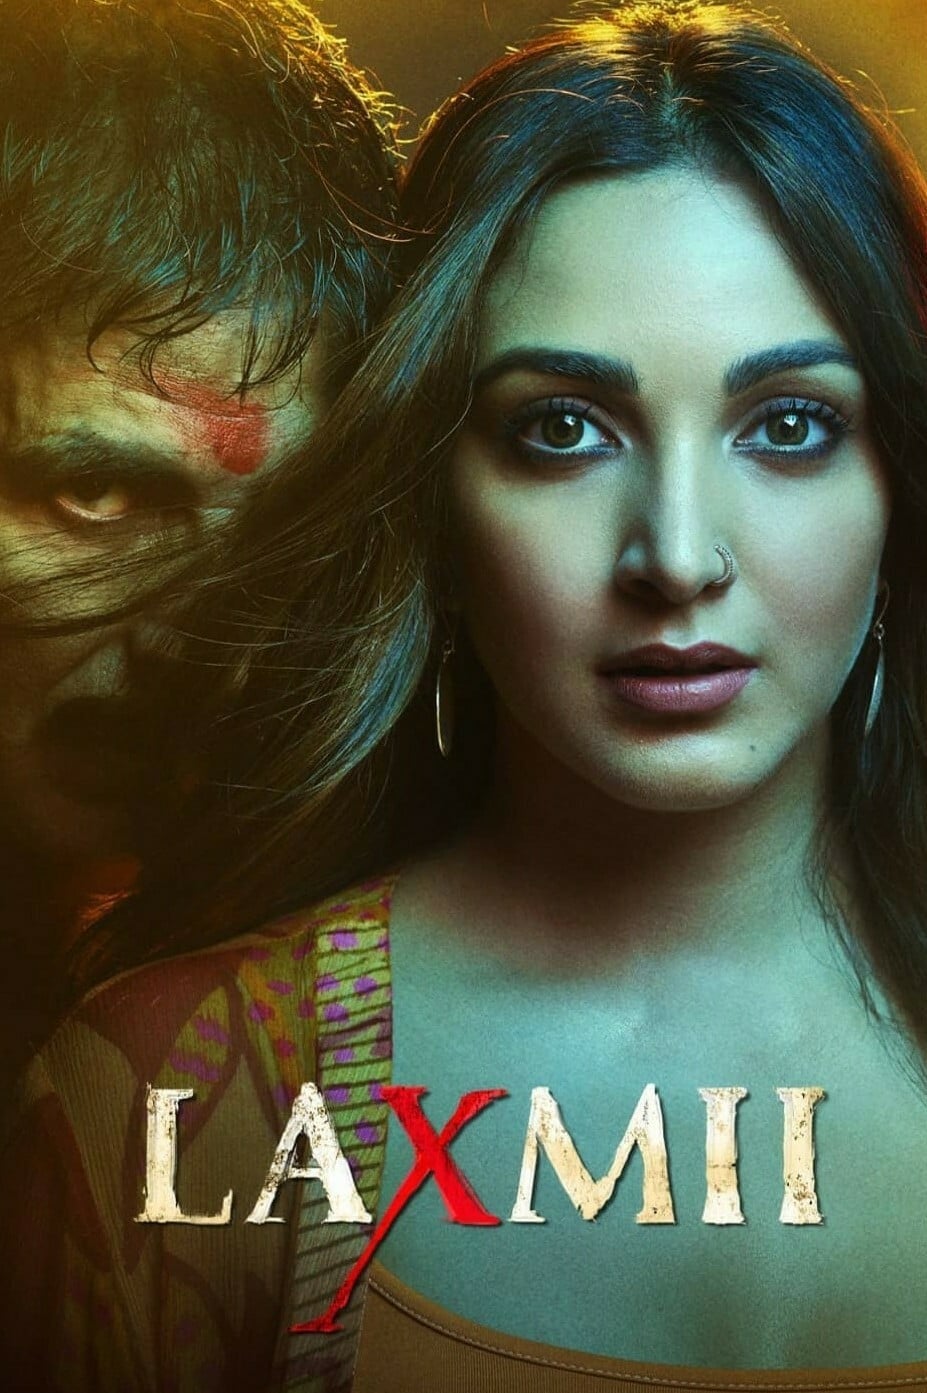 Poster for the movie "Laxmii"